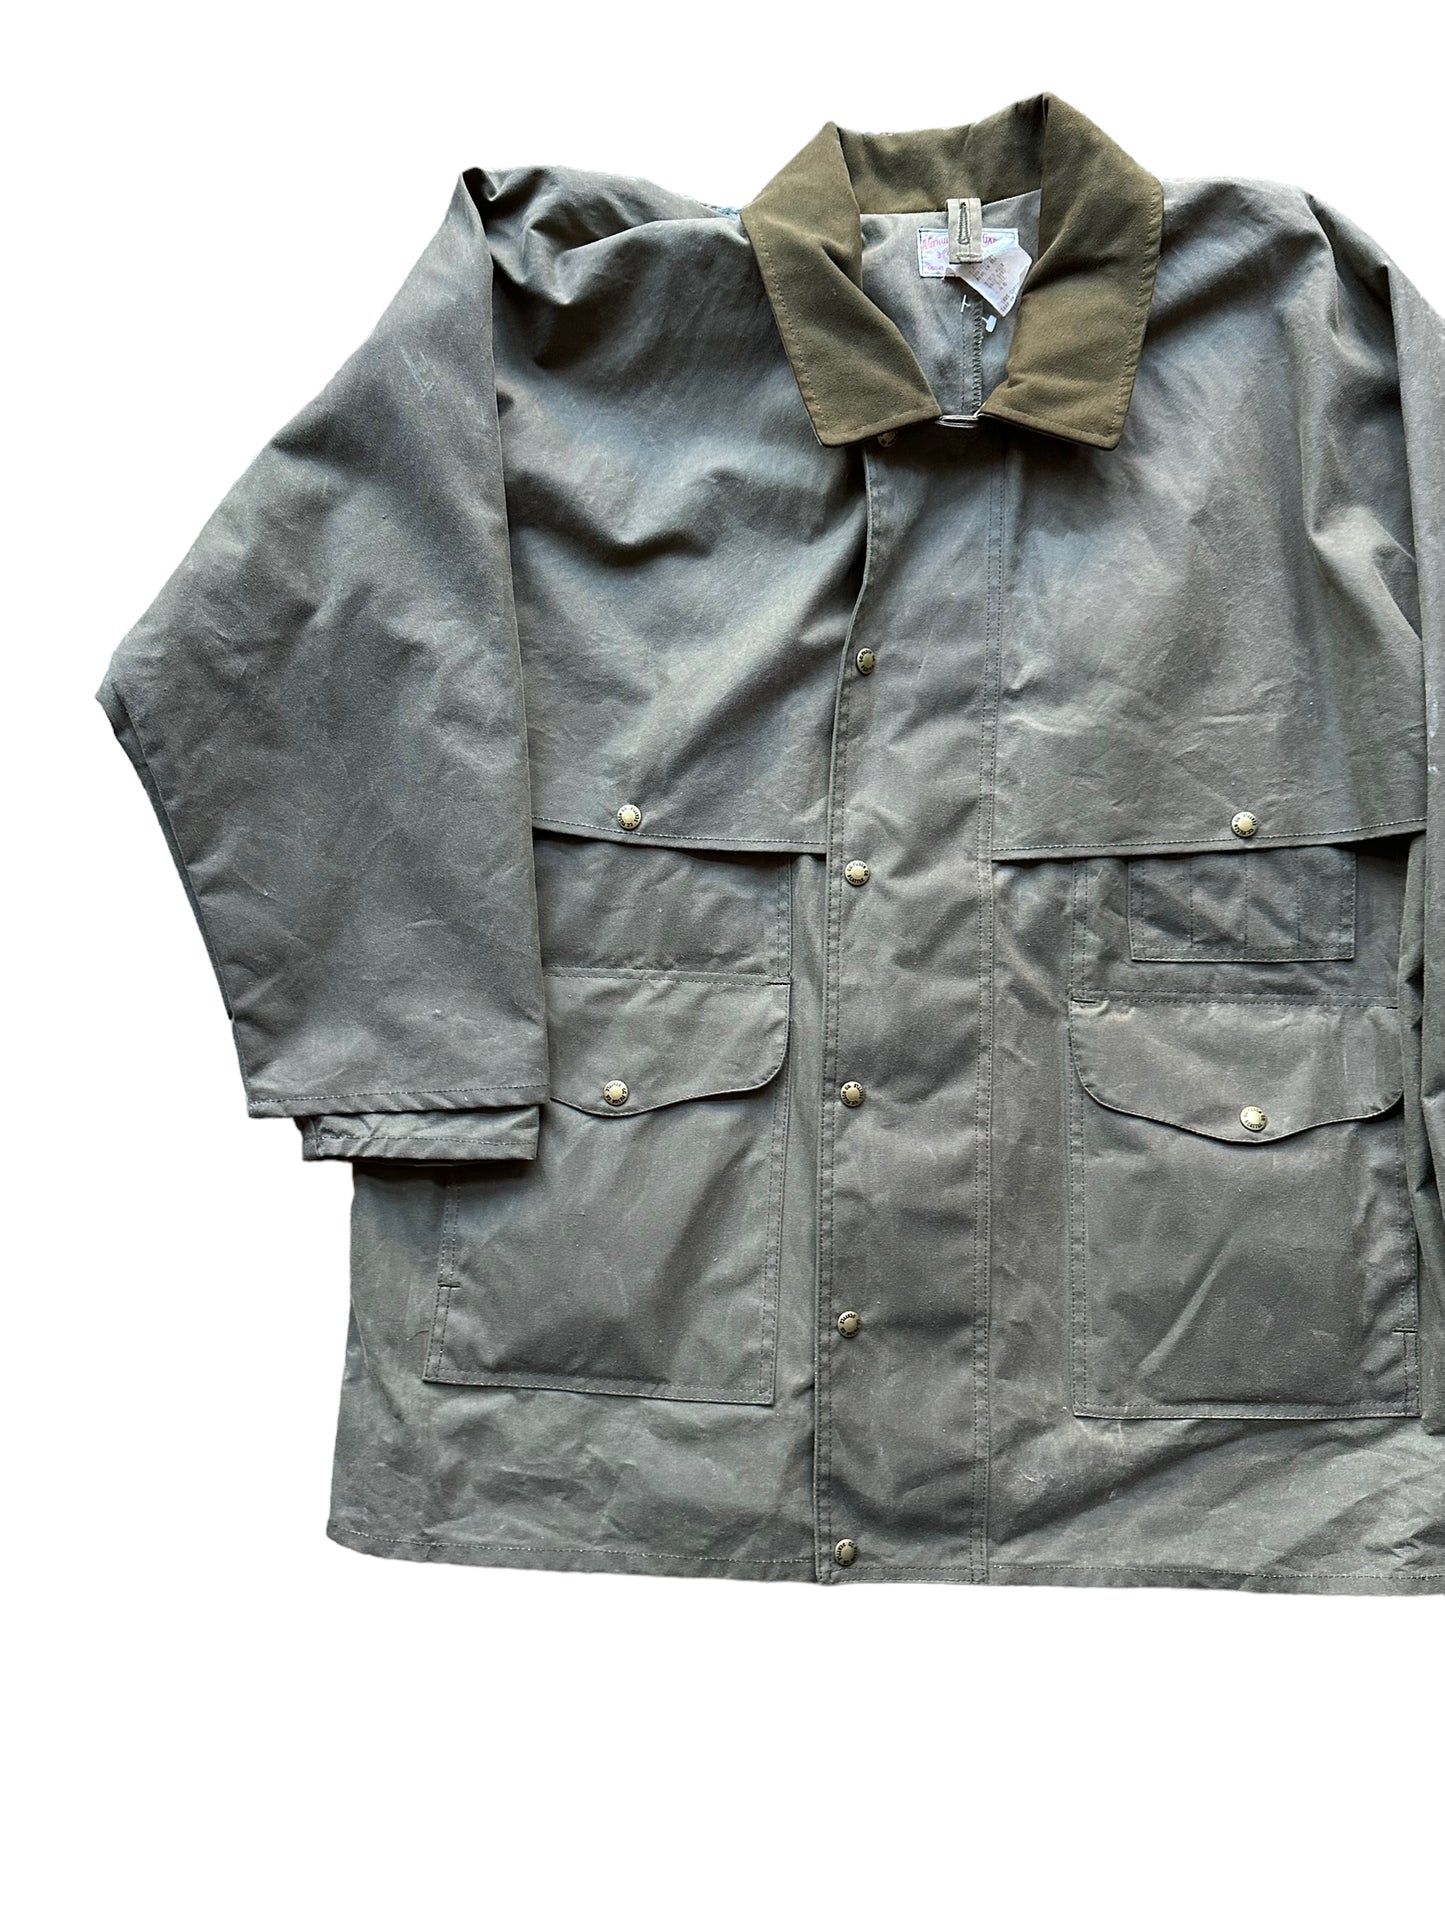 Front Right View of NWT Vintage Filson Shelter Cloth Packer Coat SZ 46 |  Barn Owl Vintage Goods Filson | Vintage Filson Tin Cloth Workwear Seattle